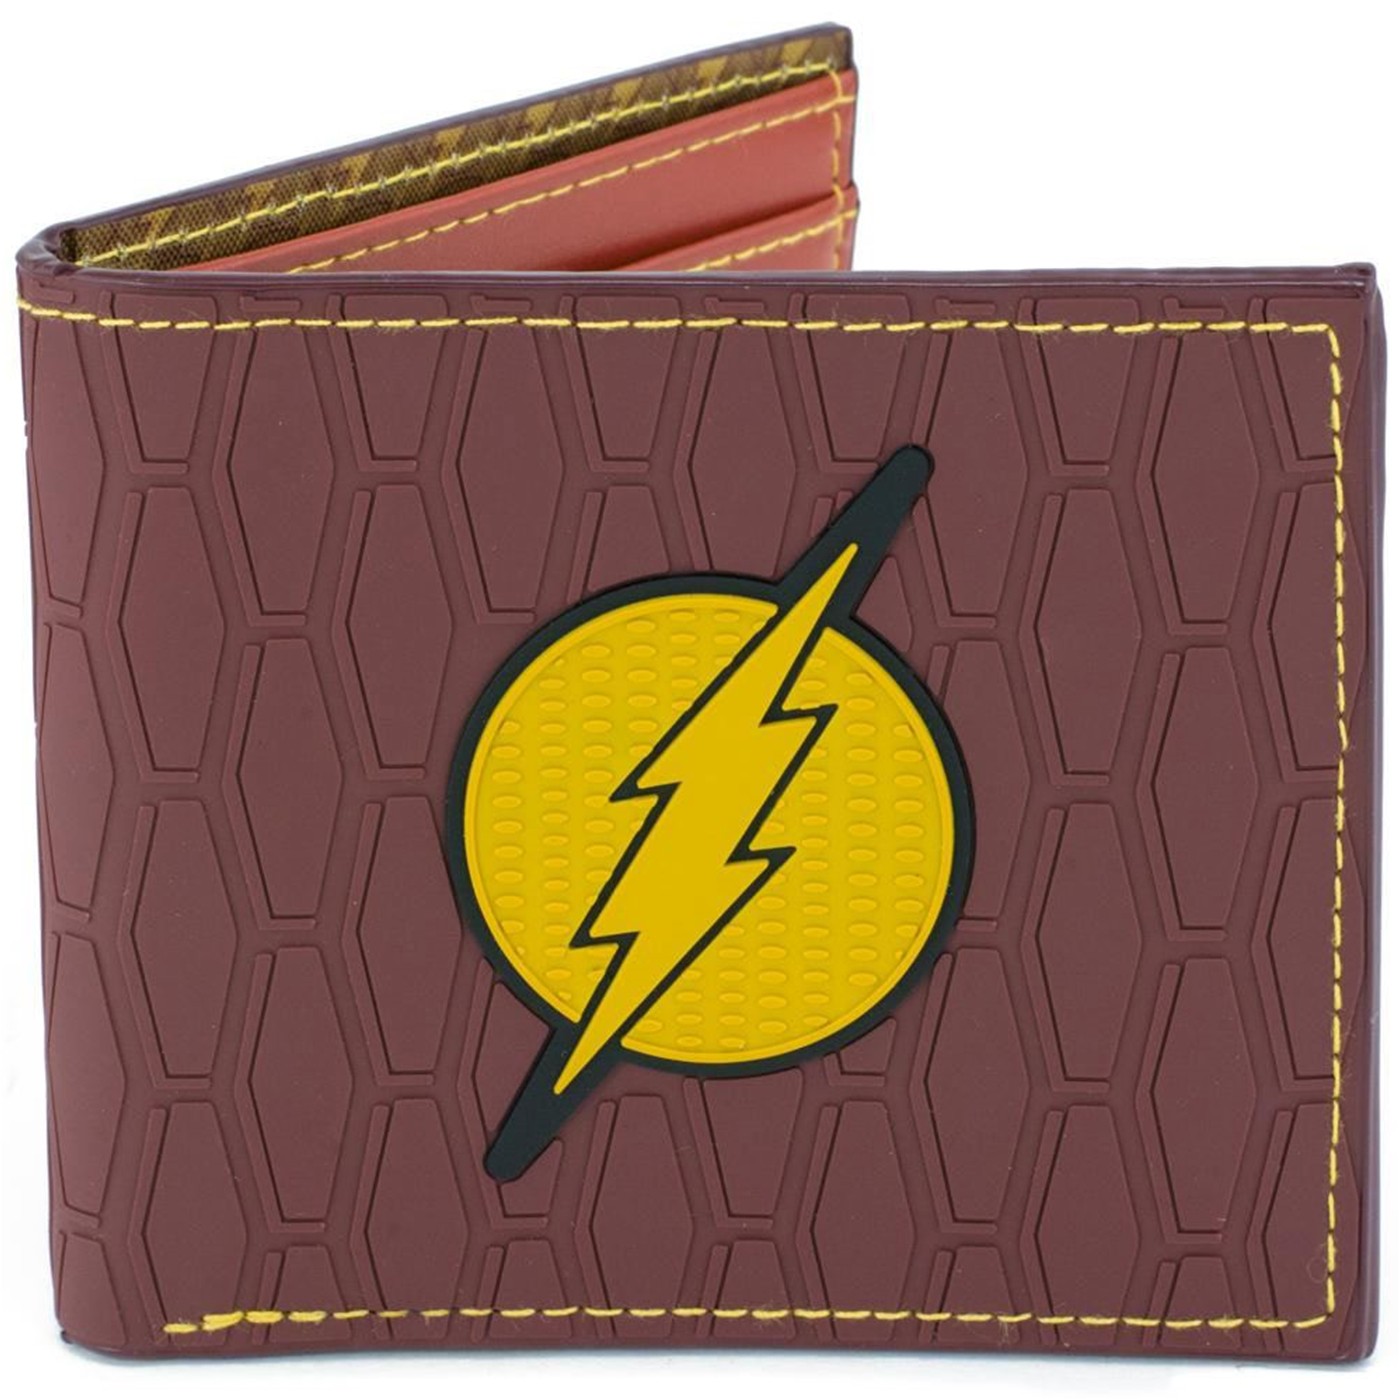 The Flash Icon Badge Rubber Wallet